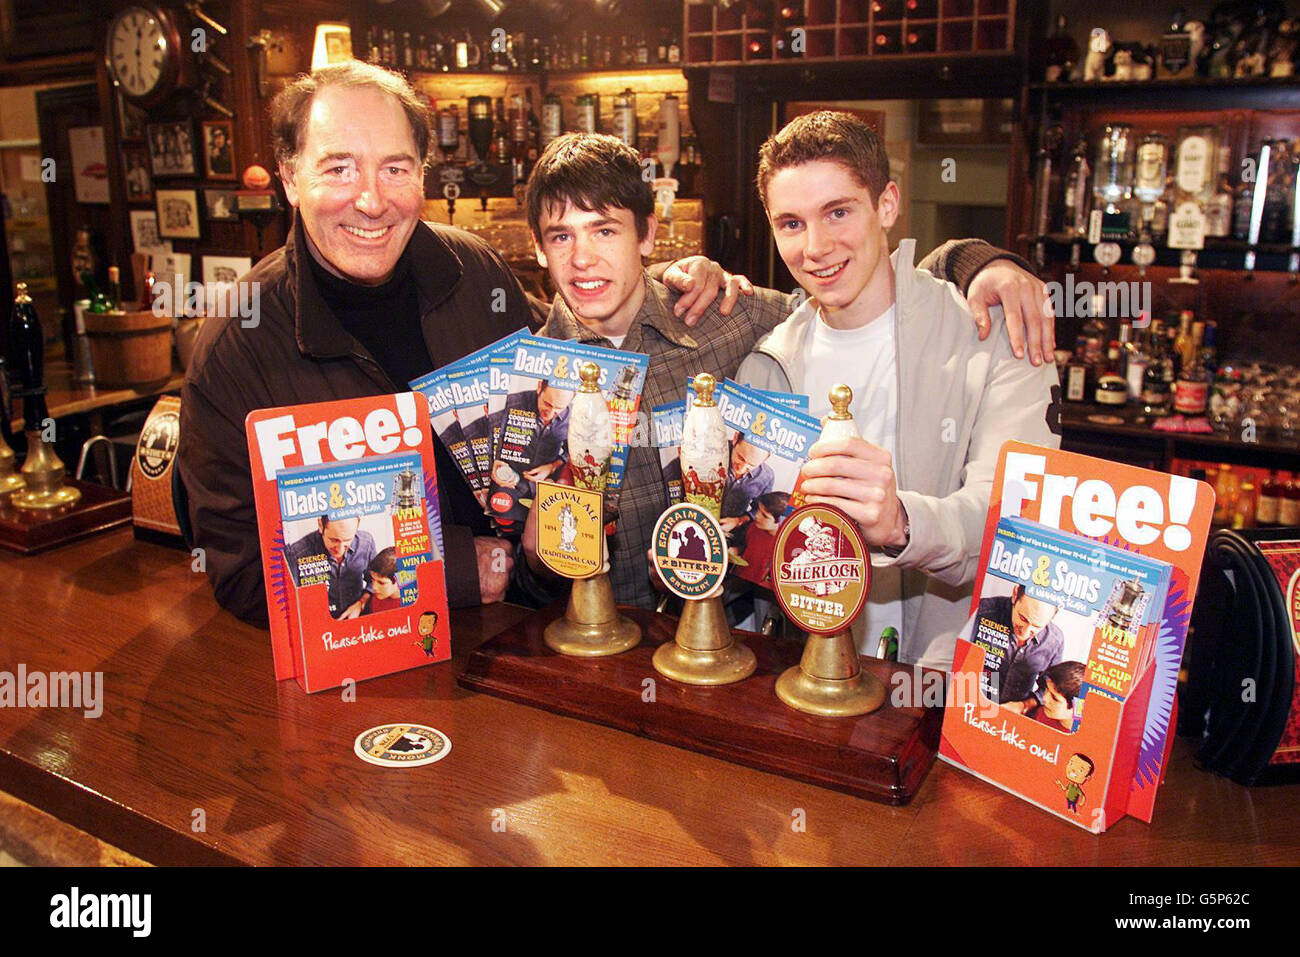 Emmerdale's Jack Sugden, played by Clive Hornby with his two on-screen sons Robert, played by Karl Davies (R) and Andy, played by Kelvin Fletcher at the Woolpack during the launch of the Dad's and Son's Campaign on the Emmerdale set in Leeds. * The Sugden family are backing the Department for Education and Skills' campaign to encourage dads to take an active role in their sons' education. Stock Photo